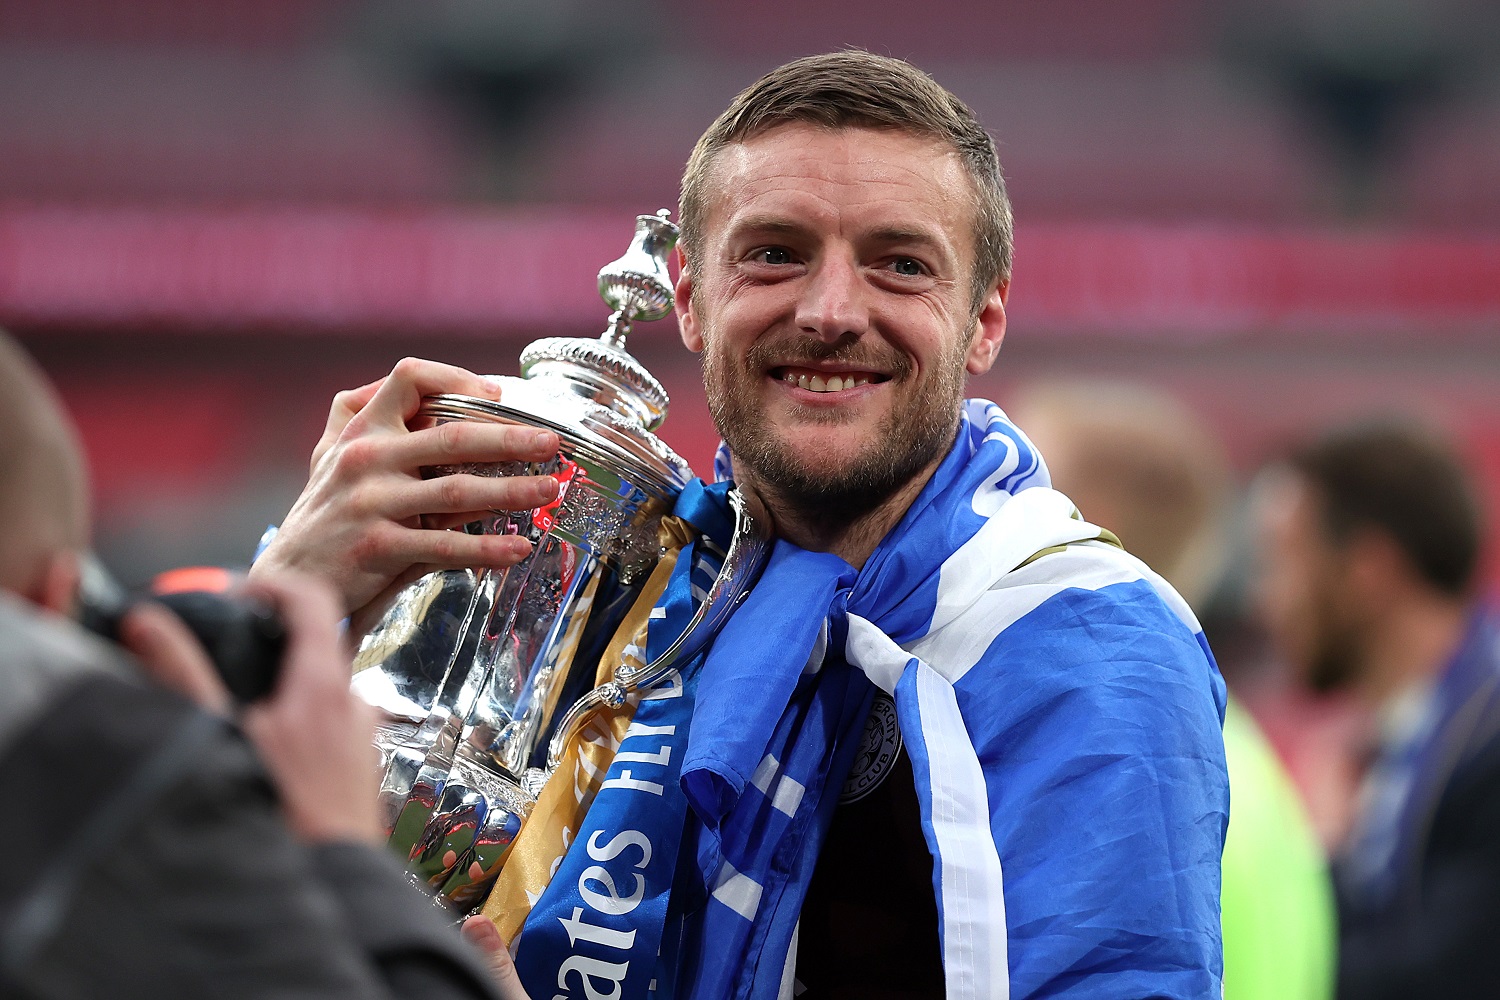 Jamie Vardy of Leicester City celebrates with the trophy following The Emirates FA Cup Final match against Chelsea at Wembley Stadium on May 15, 2021. | Alex Pantling - The FA/The FA via Getty Images